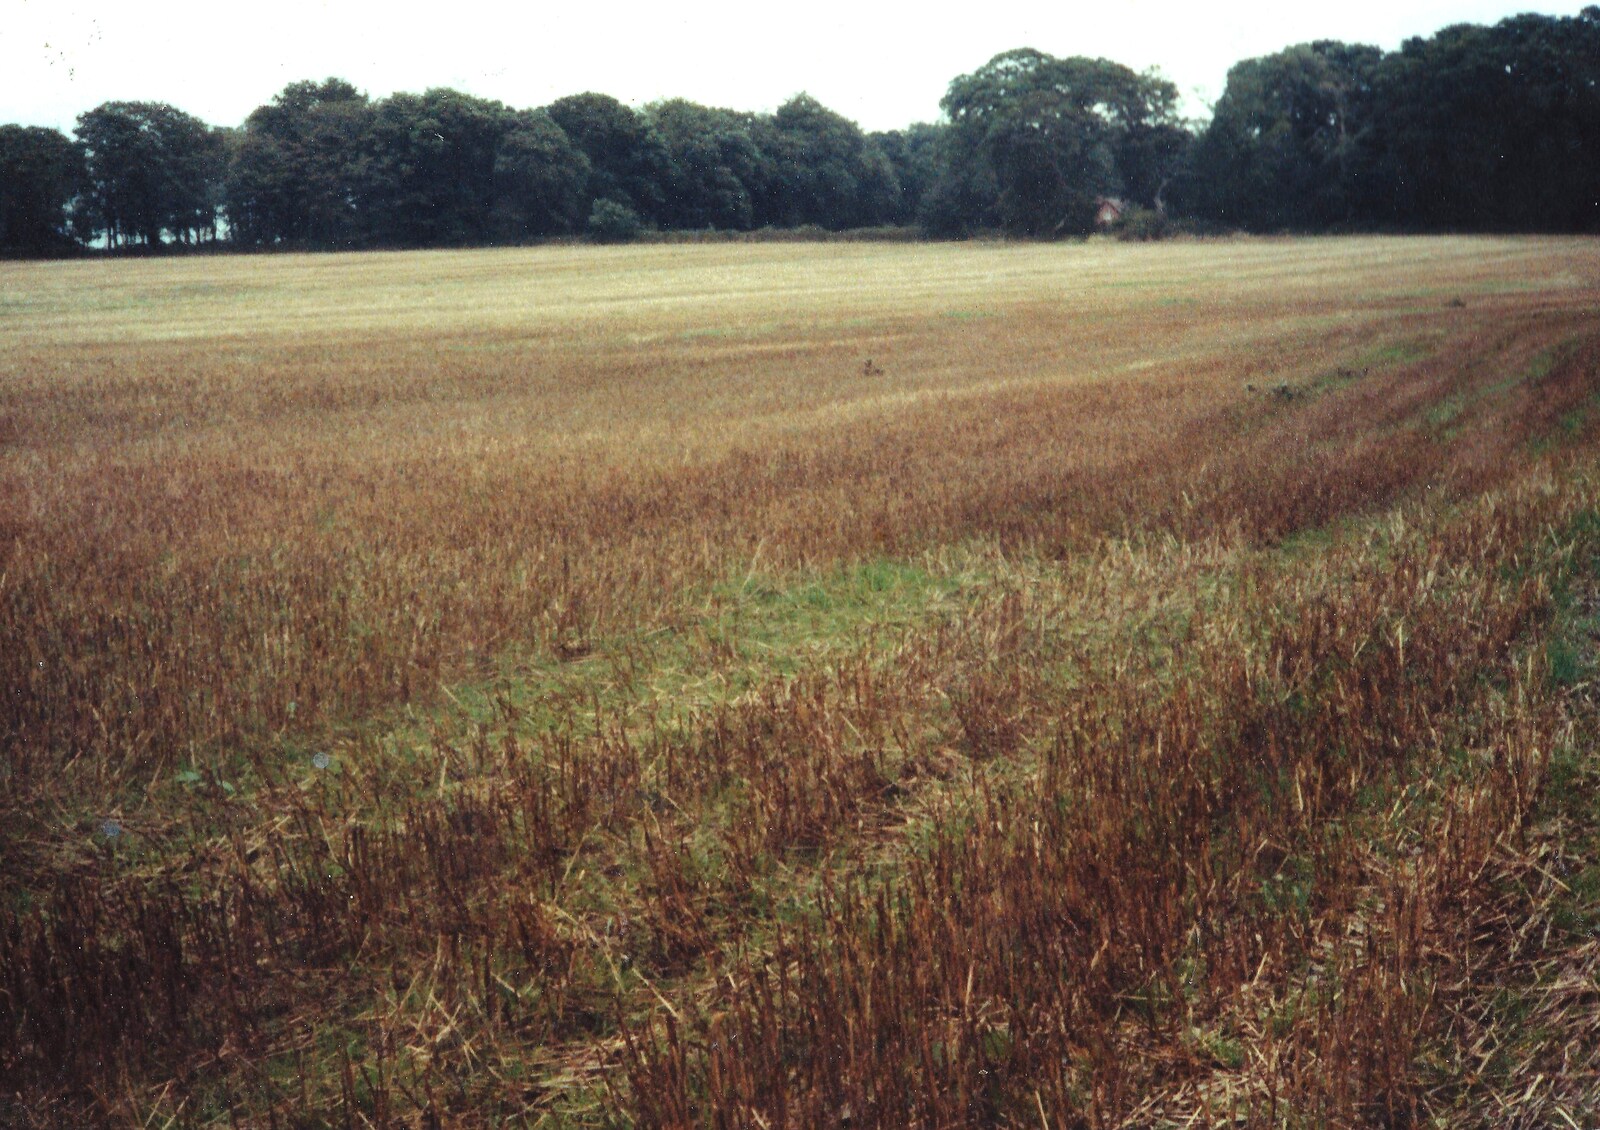 The stubble field that will become the vineyard from Constructing a Vineyard, Harrow Road, Bransgore, Dorset - 1st September 1981